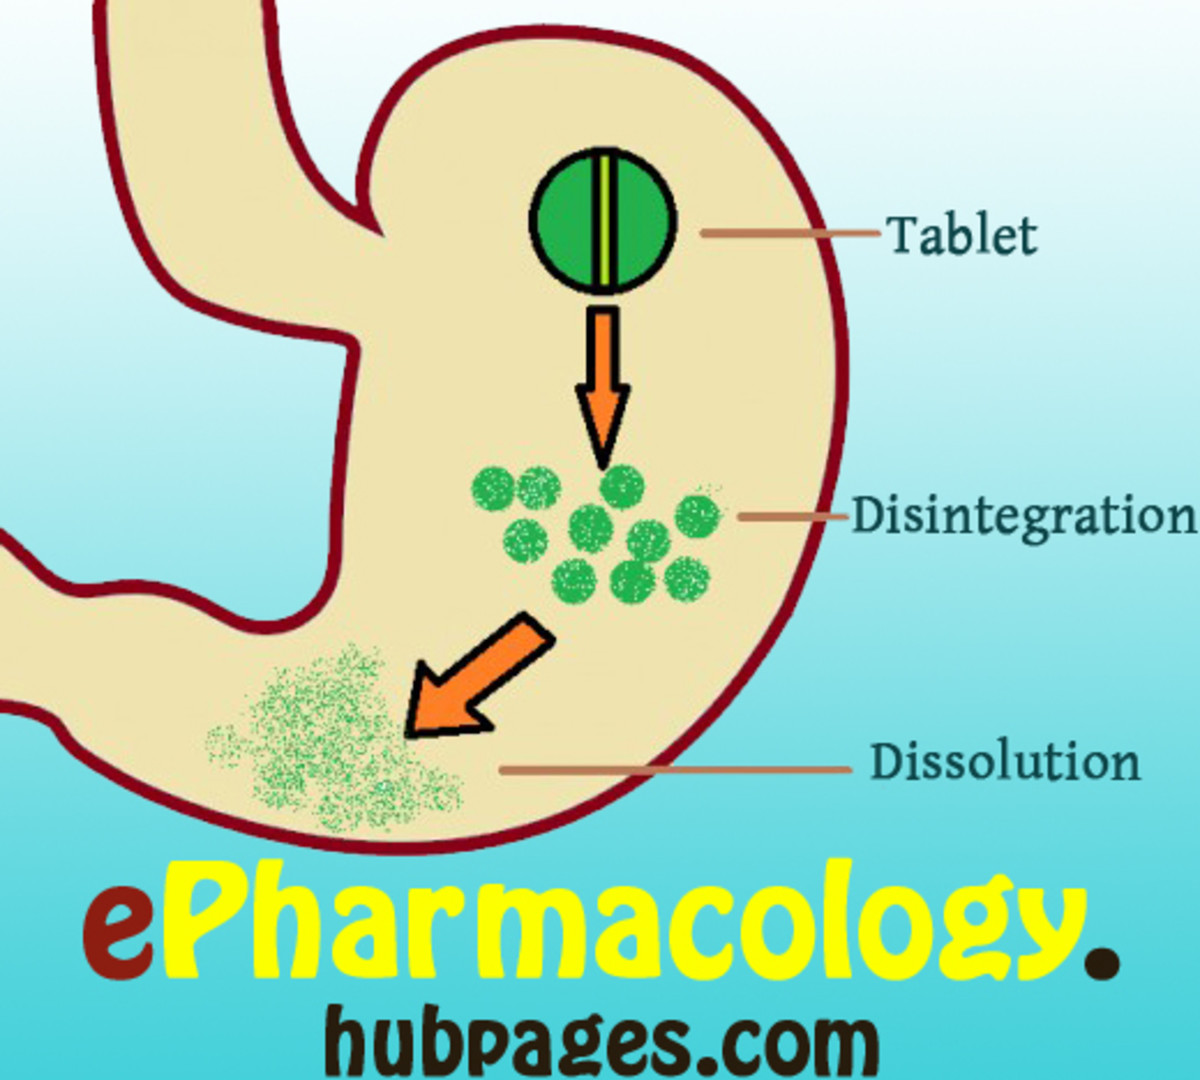 A tablet has to be disintegrated and dissolved before it can be absorbed. But a capsule directly undergoes dissolution!